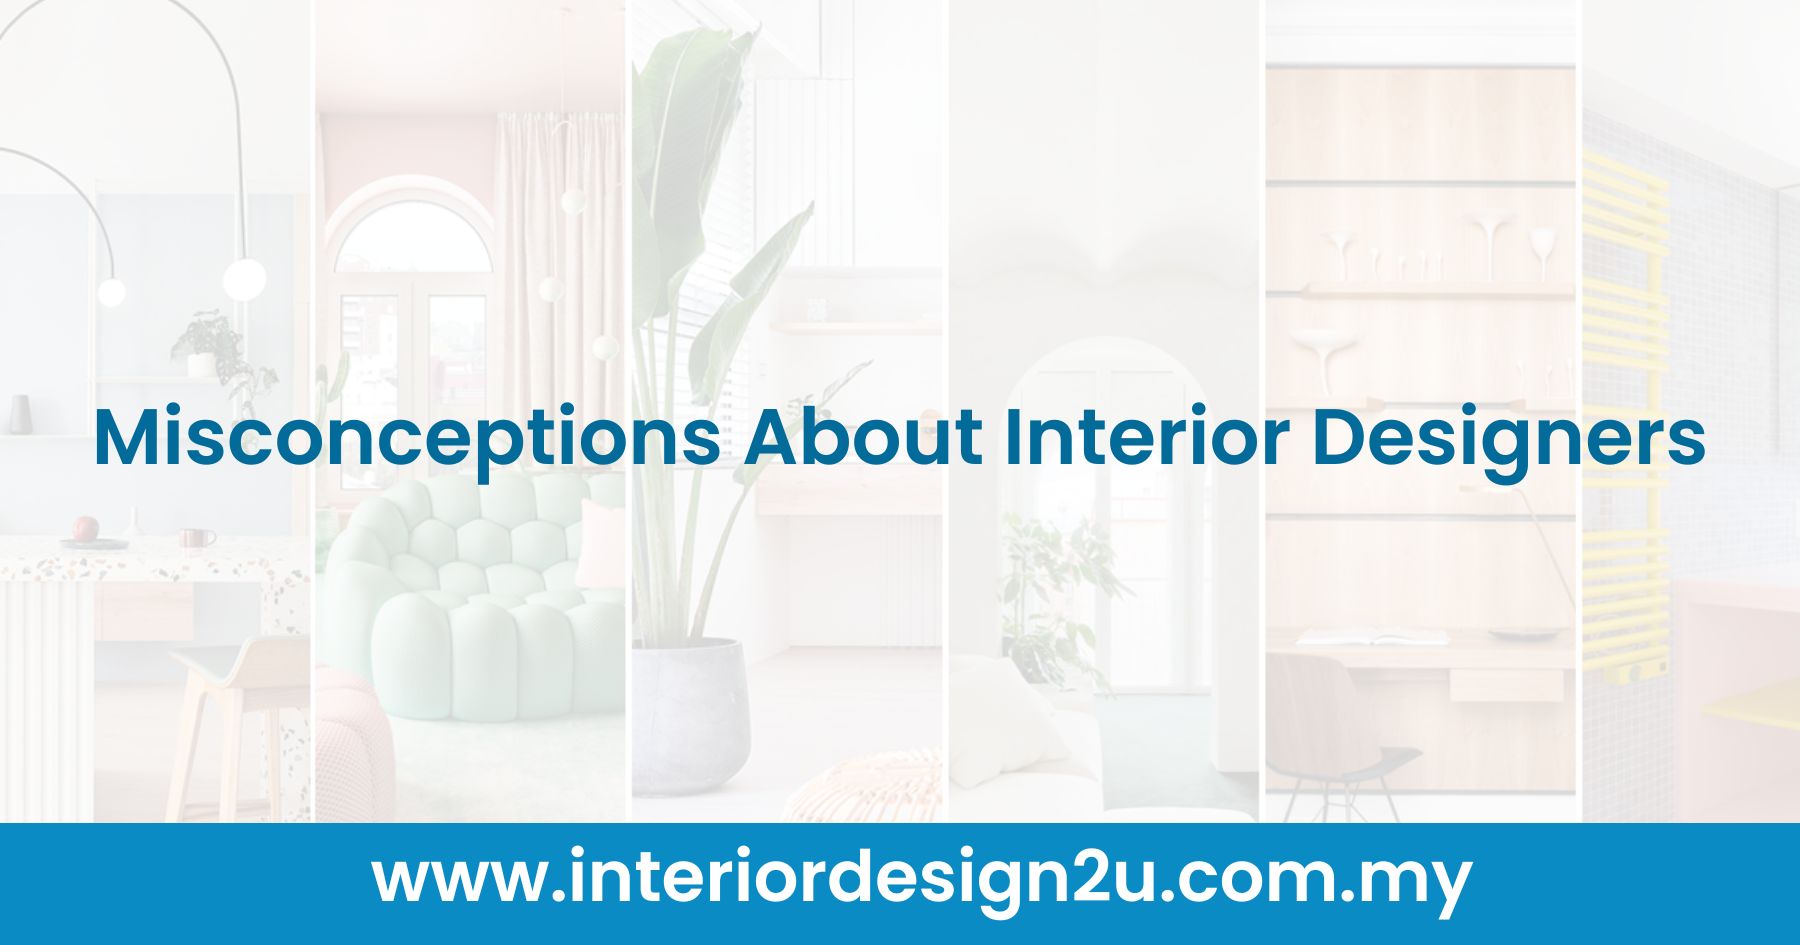 Misconceptions About Interior Designers